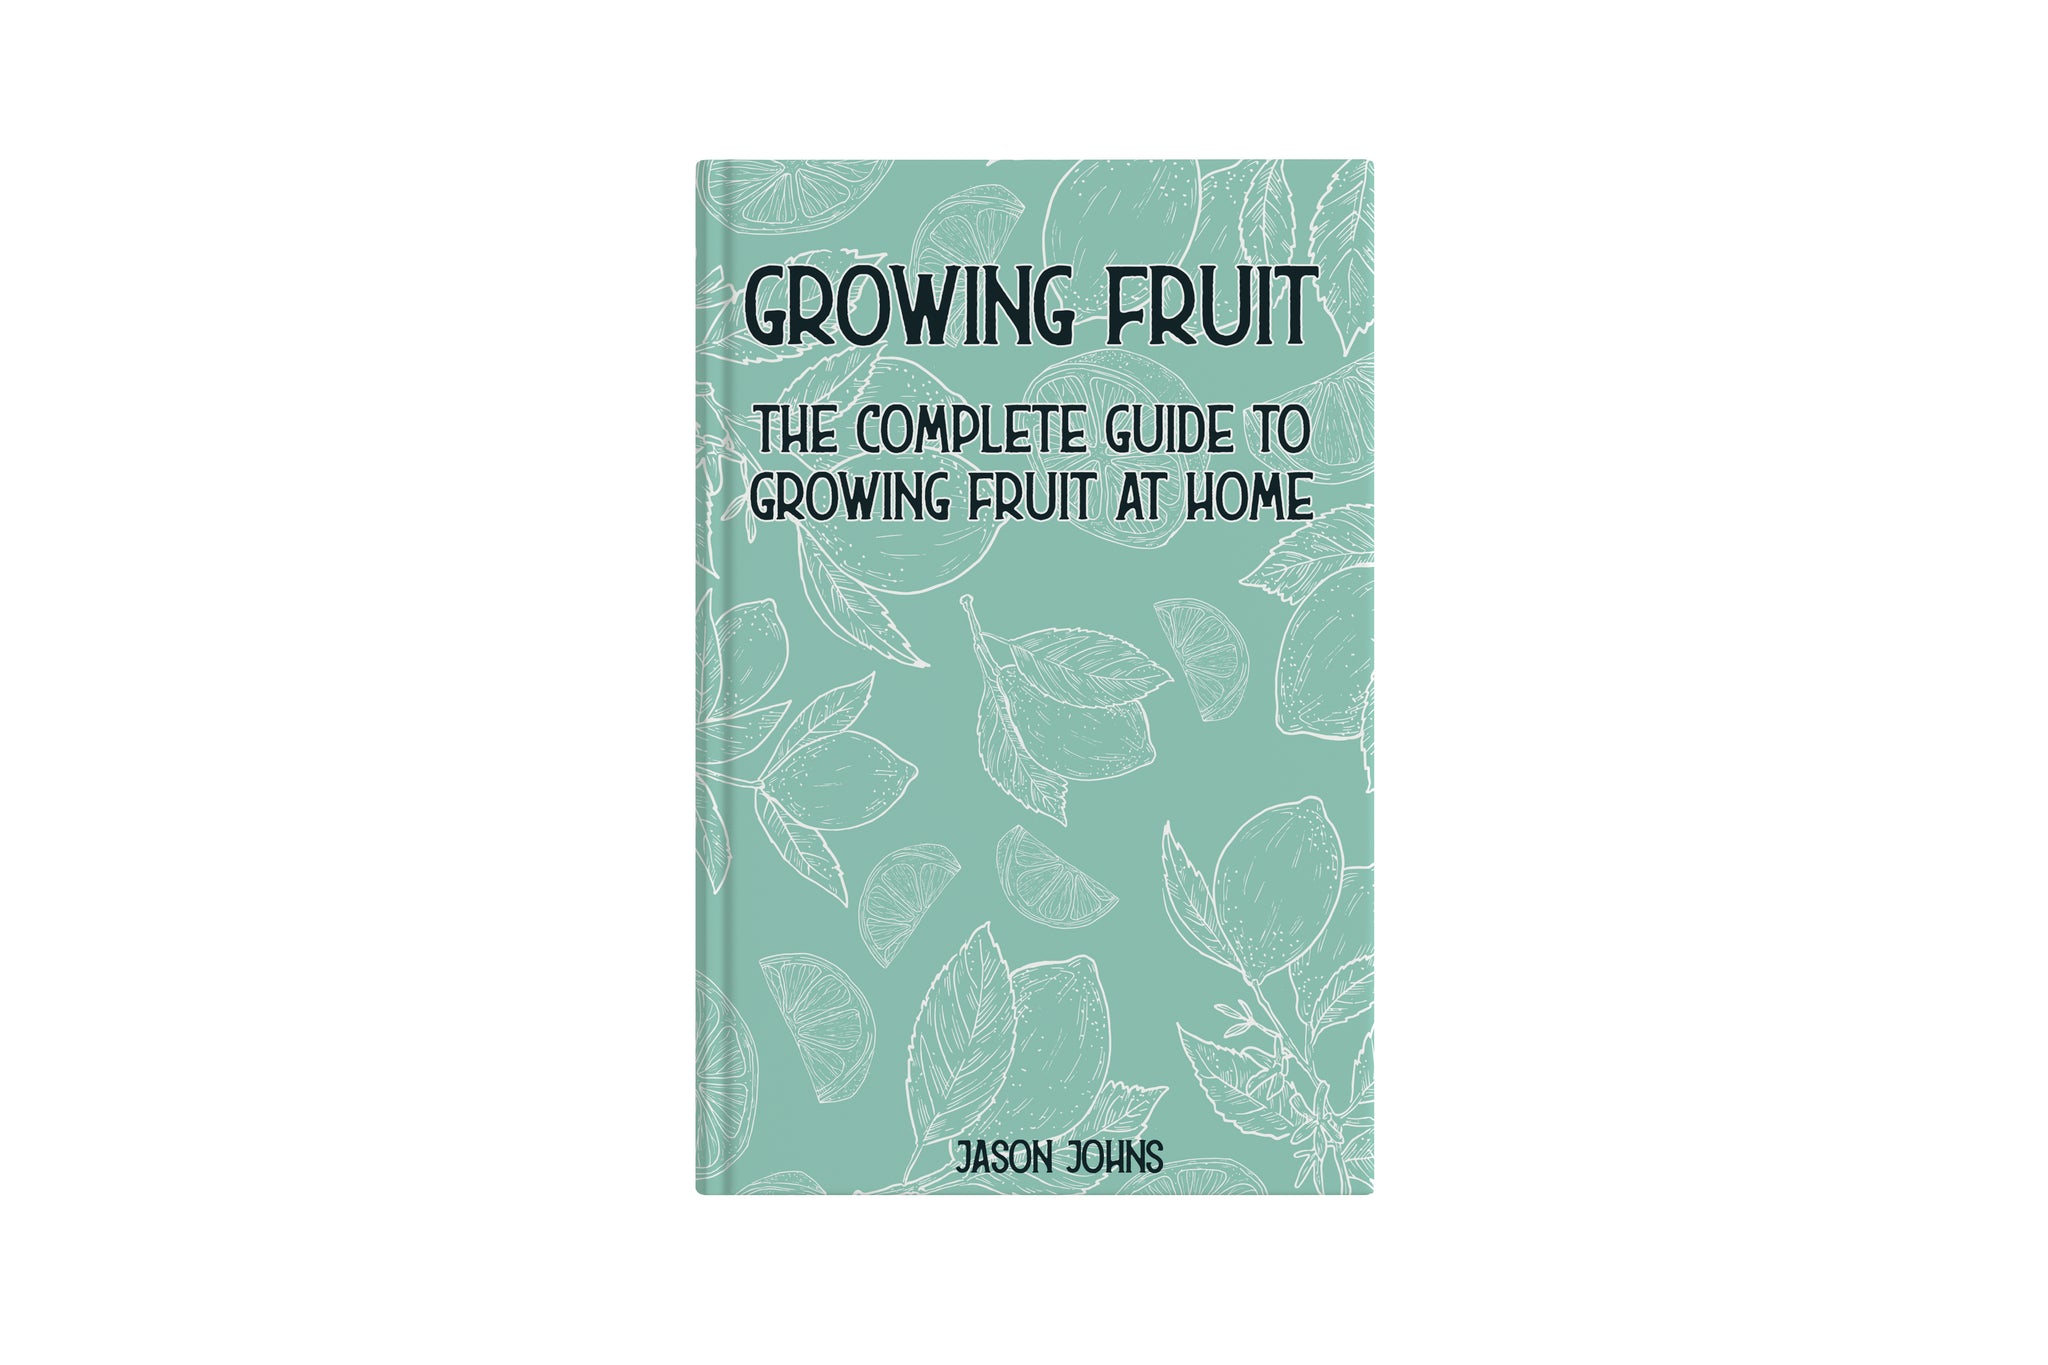 Growing Fruit at Home Book